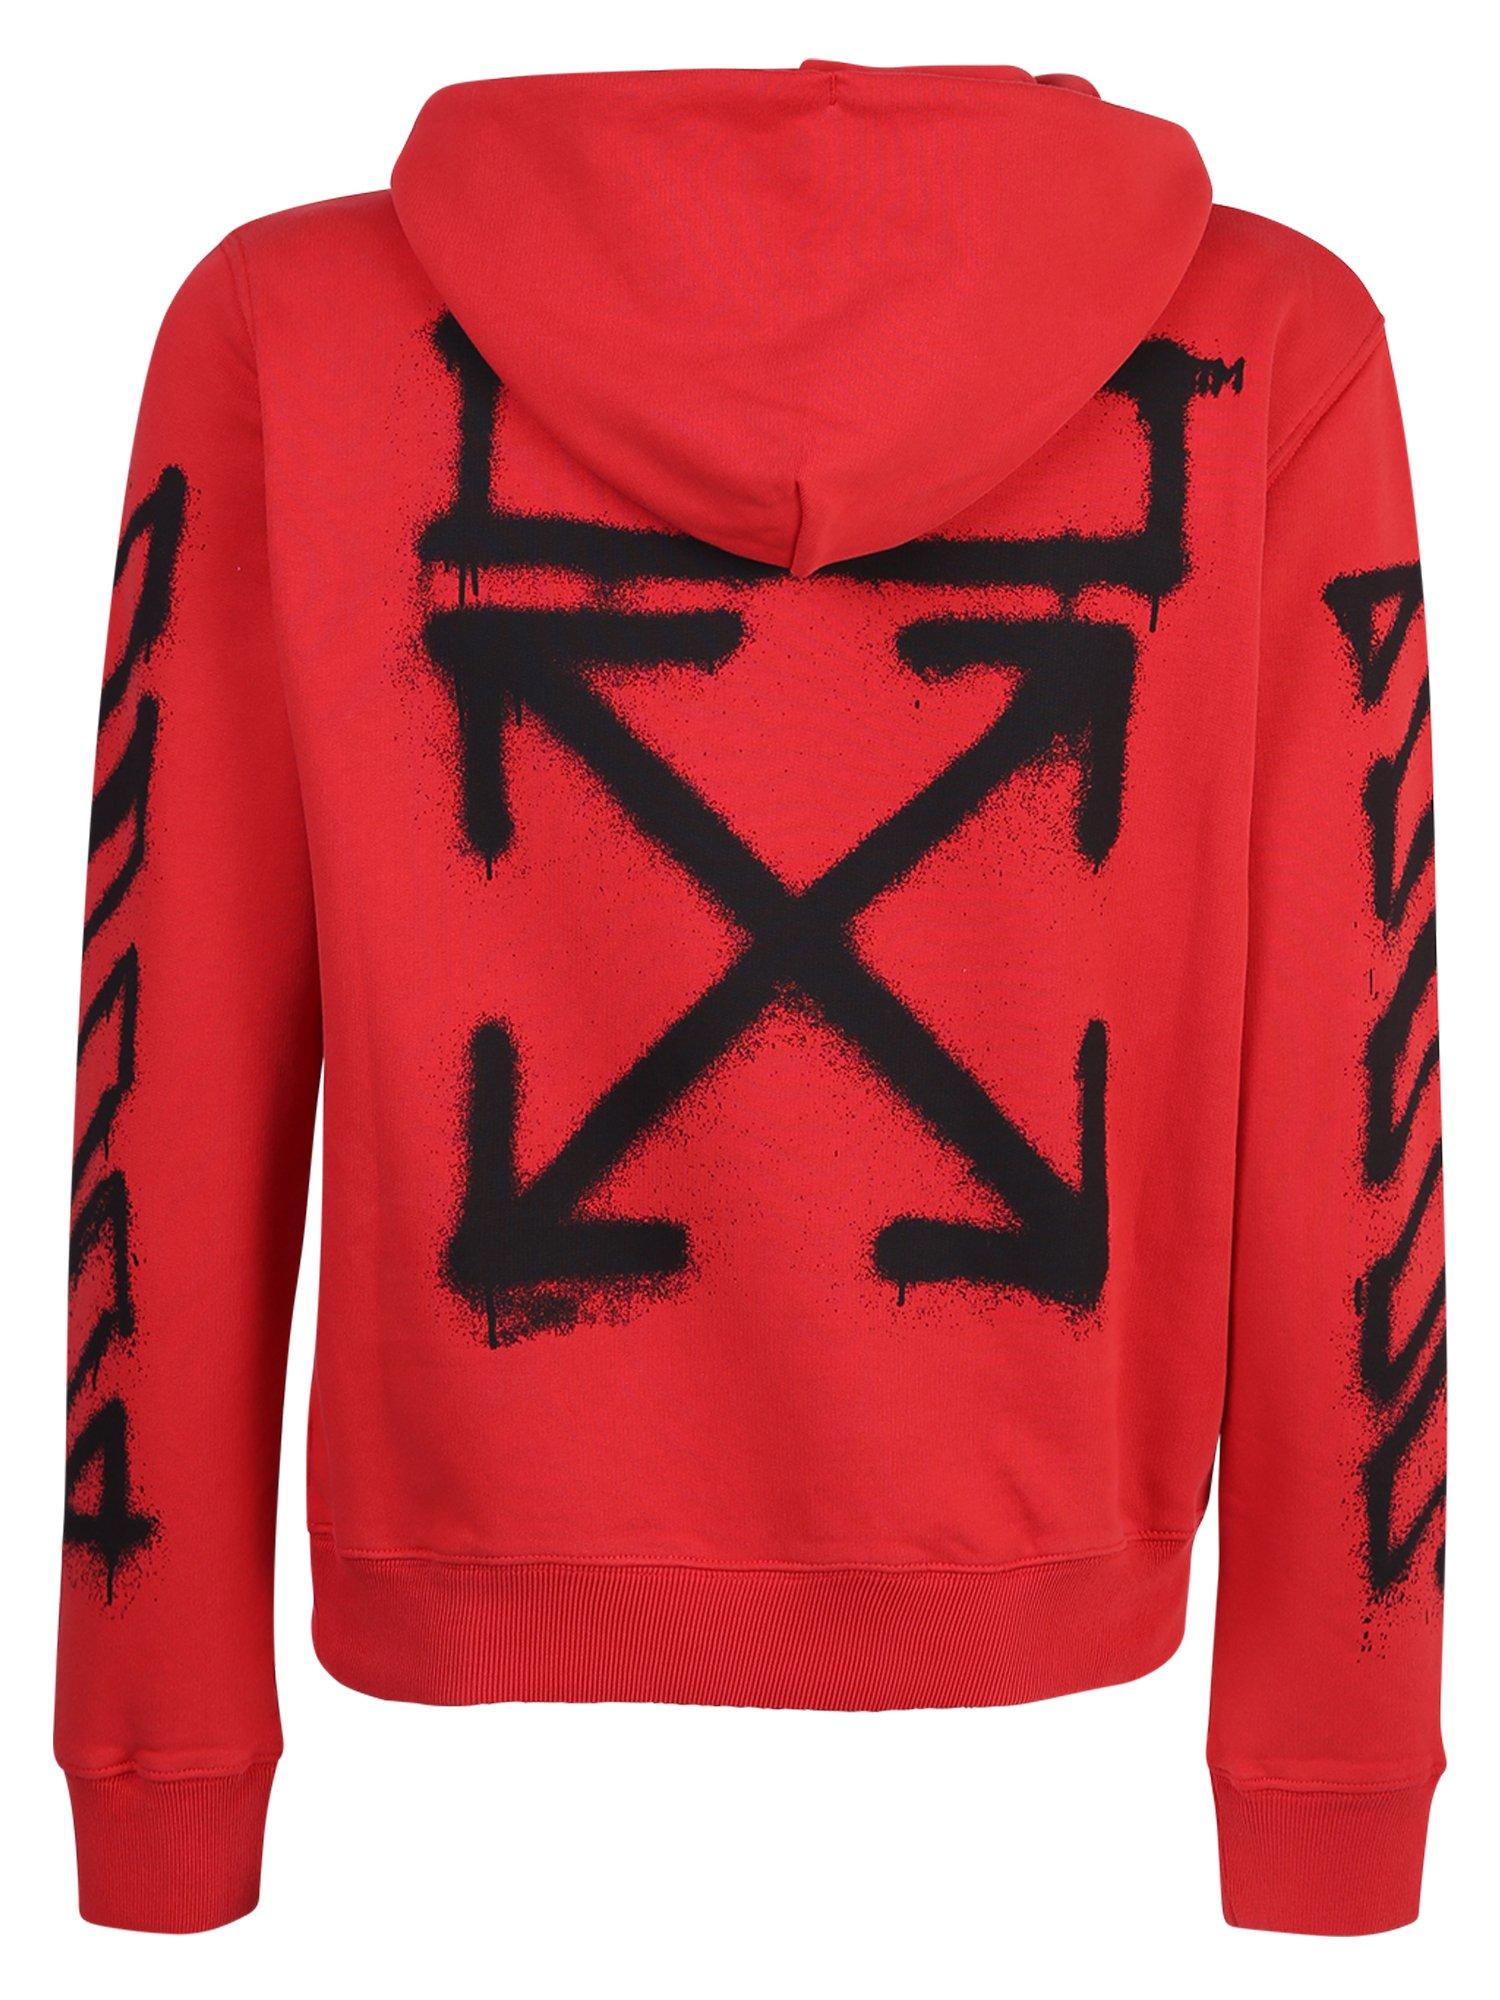 Off-White c/o Virgil Abloh Spray Marker Arrows Hoodie in Red for Men | Lyst